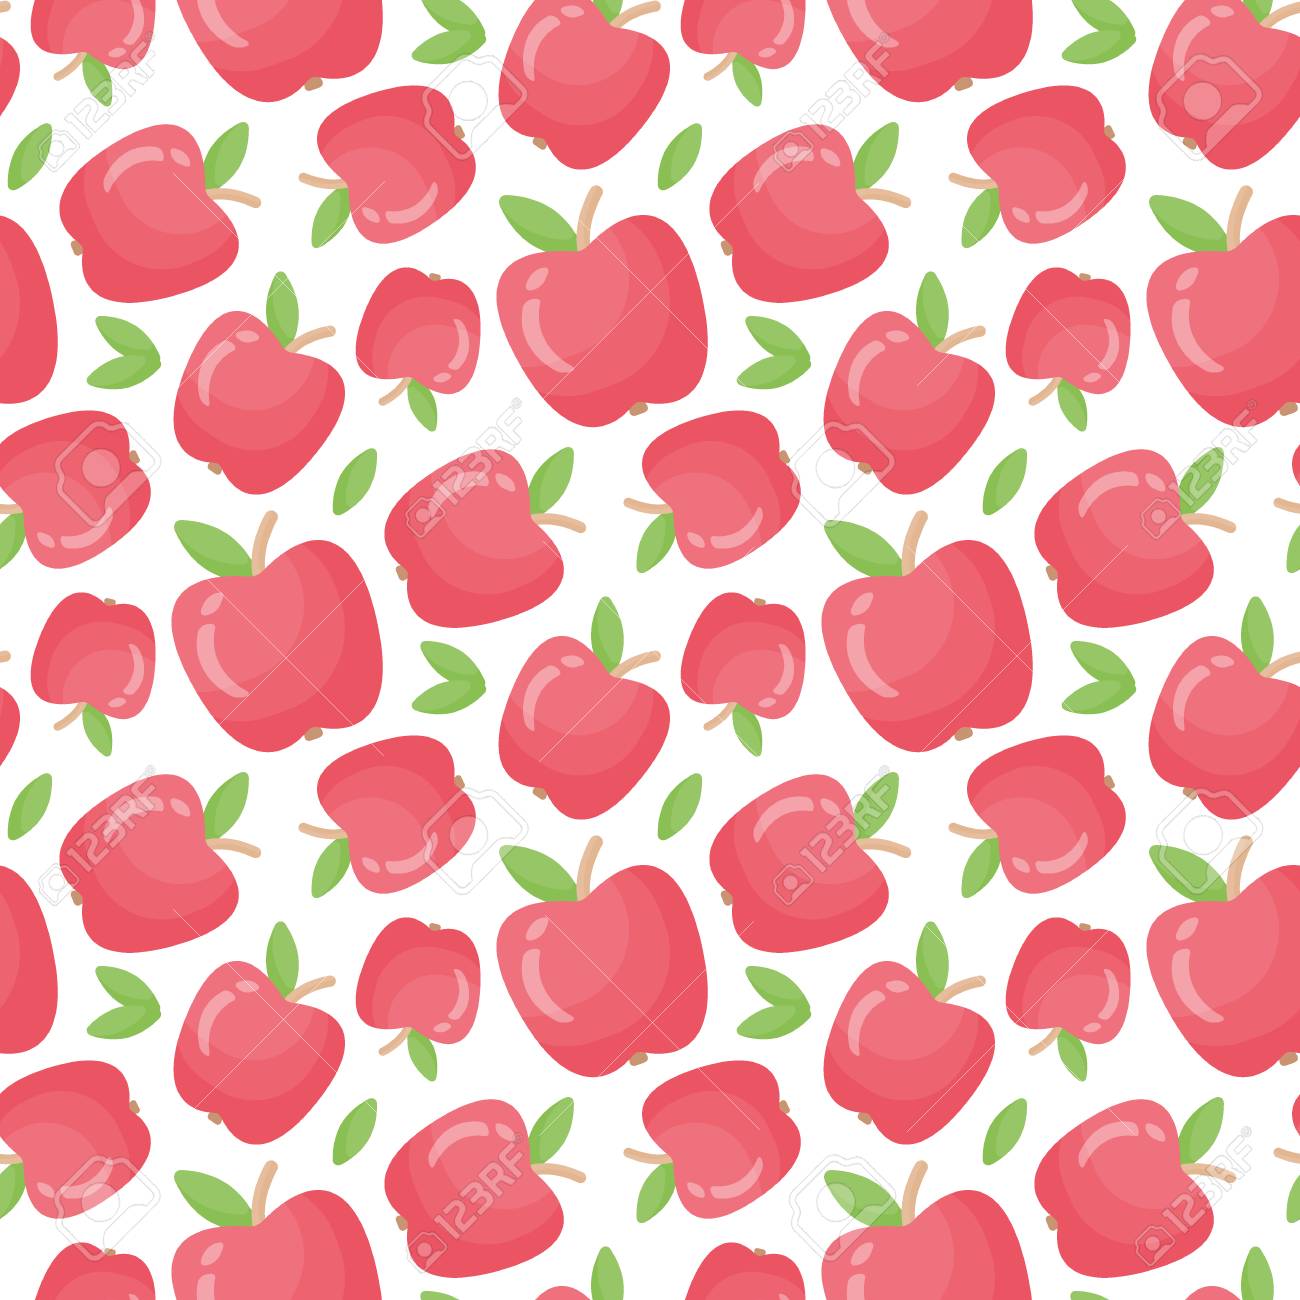 Free download Apple Seamless Pattern Flat Design Of Fruit Food On White [1300x1300] for your Desktop, Mobile & Tablet. Explore Apples Background. Apples Wallpaper, Wallpaper with Apples, Kitchen Wallpaper with Apples